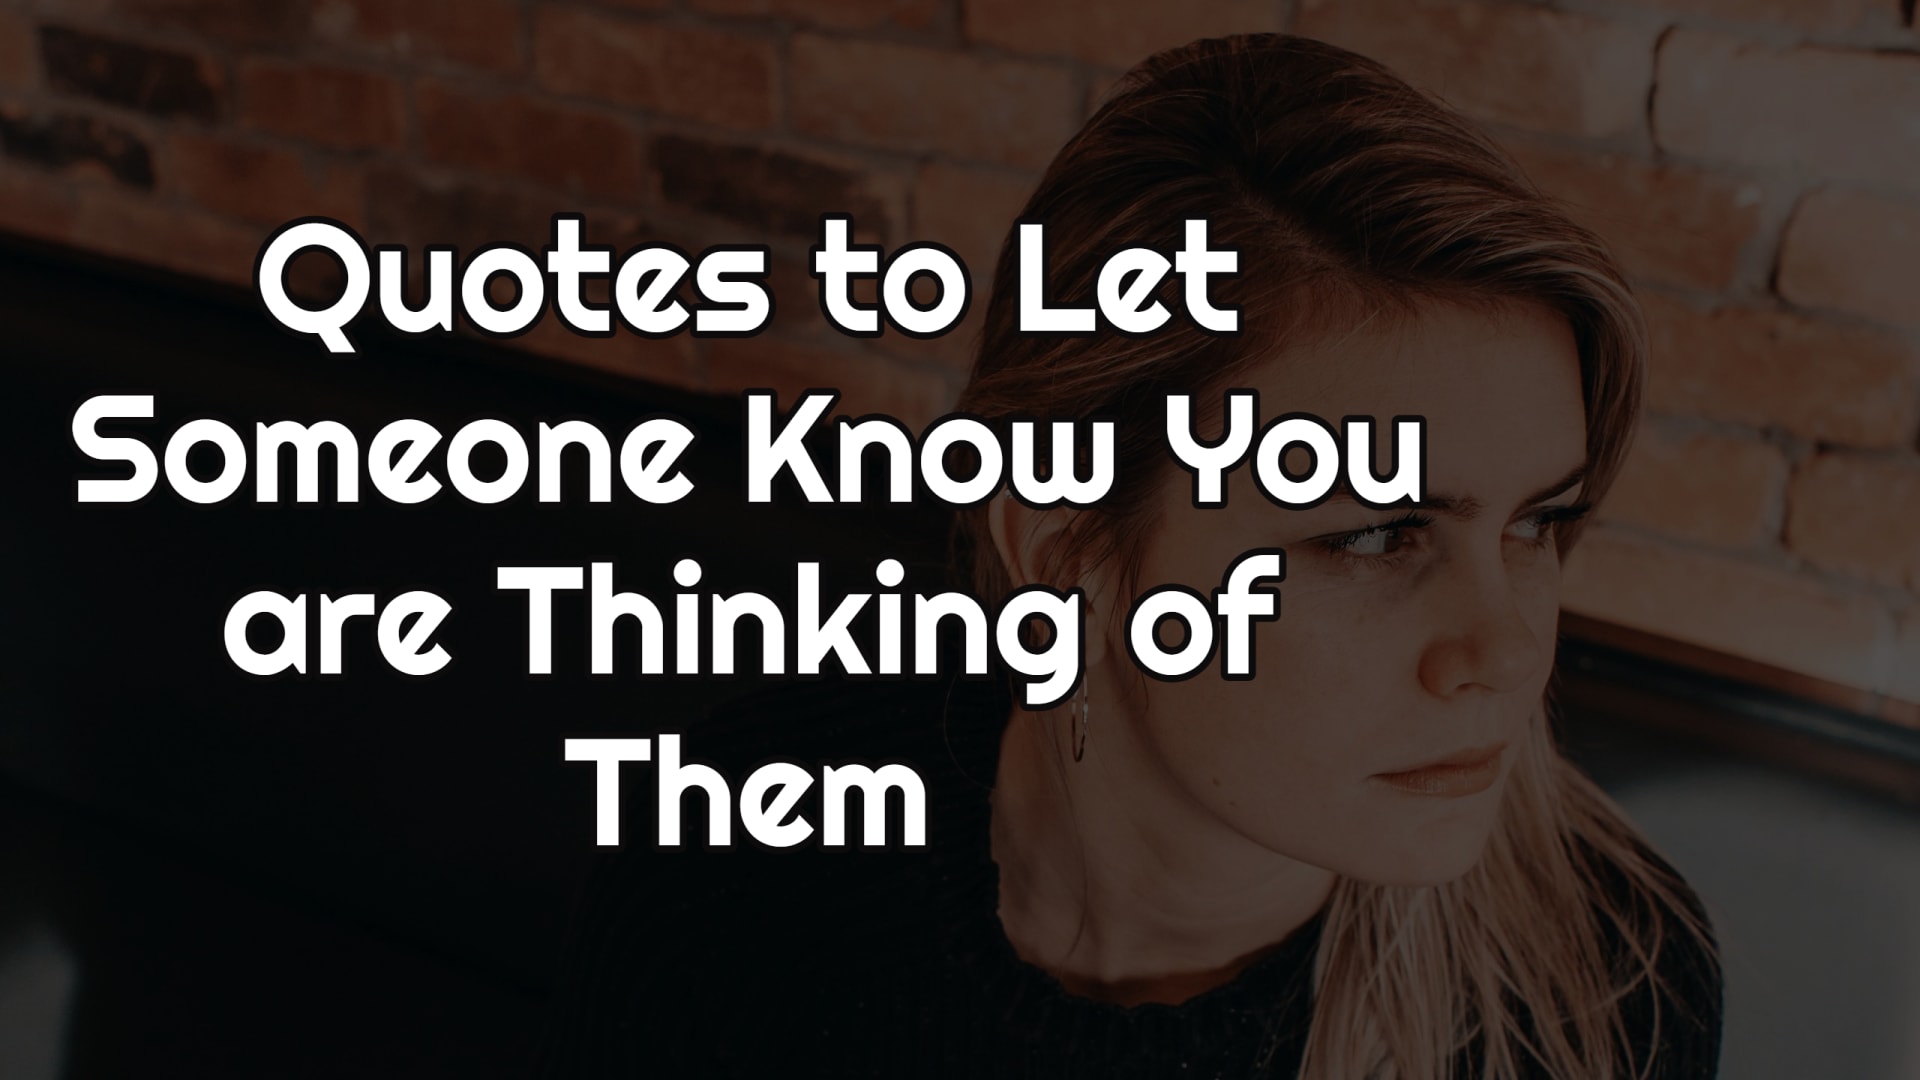 Quotes to Let Someone Know You are Thinking of Them